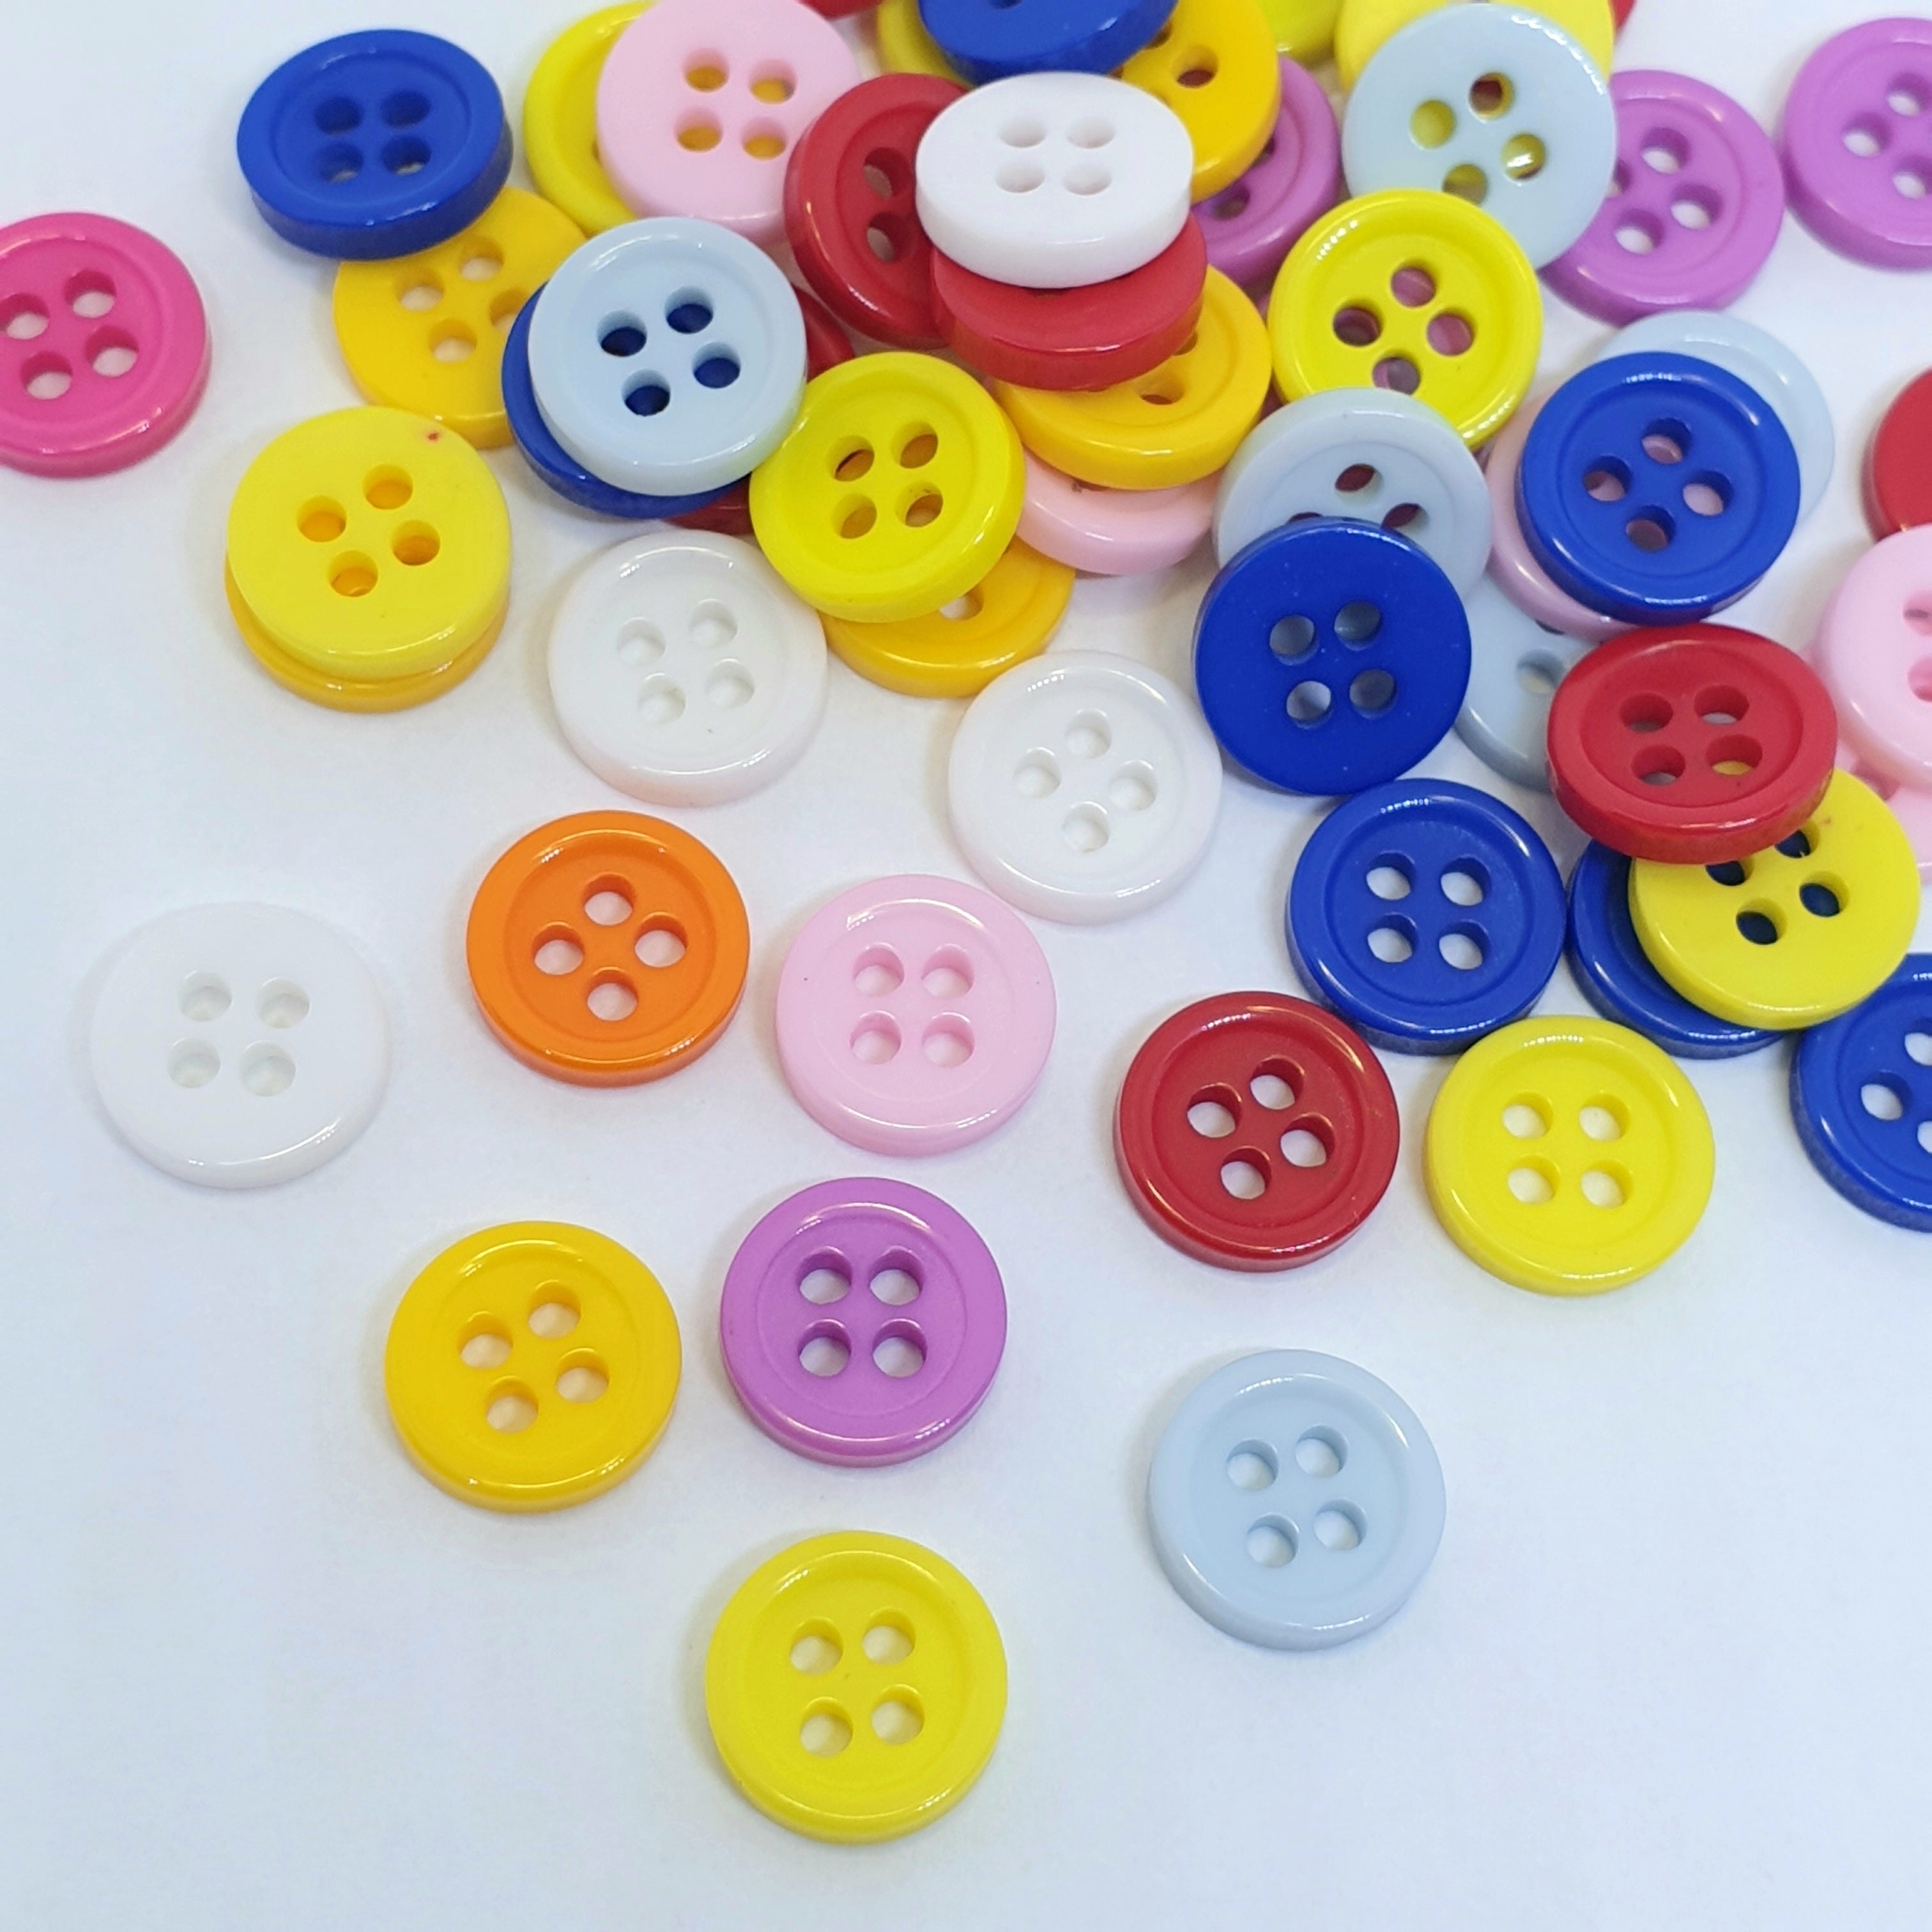 MajorCrafts 120pcs 9mm Mixed Colours 4 Holes Small Round Resin Sewing Buttons